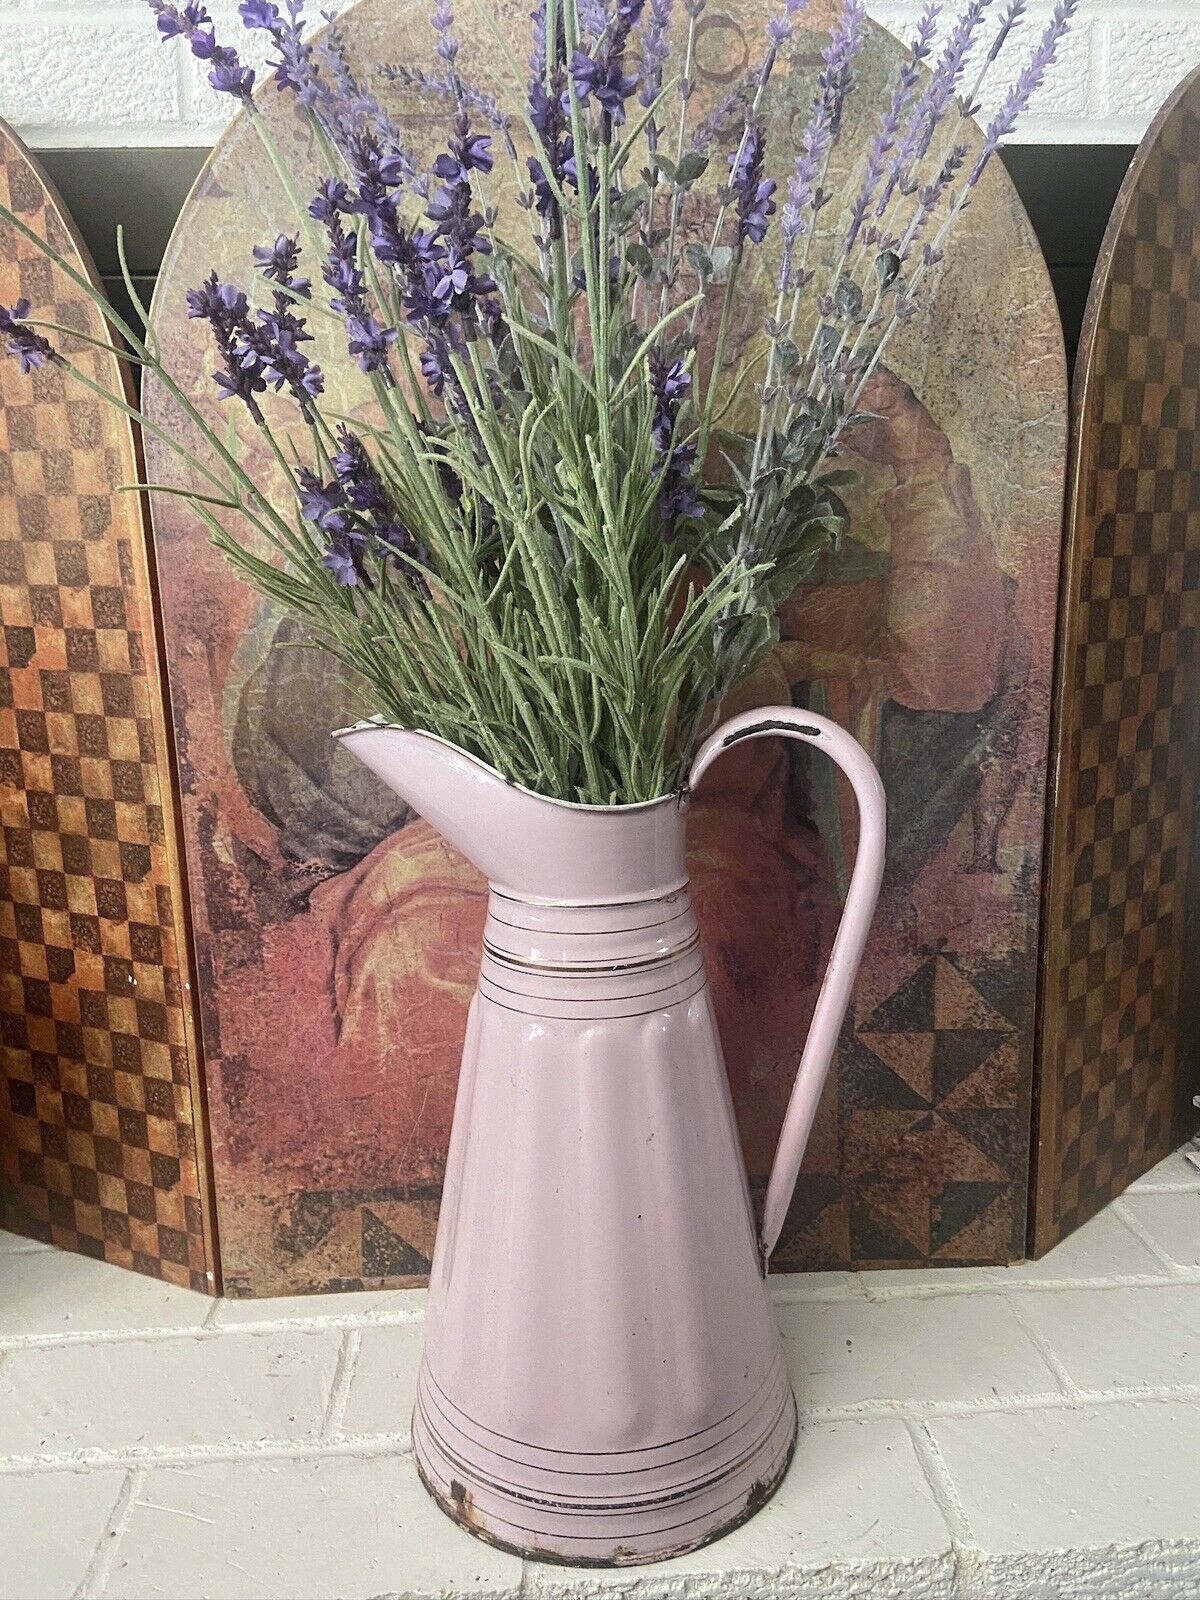 Vintage French Enamelware Body Bath Pitcher Ribbed Pink w/Gold Accents c. 1920s